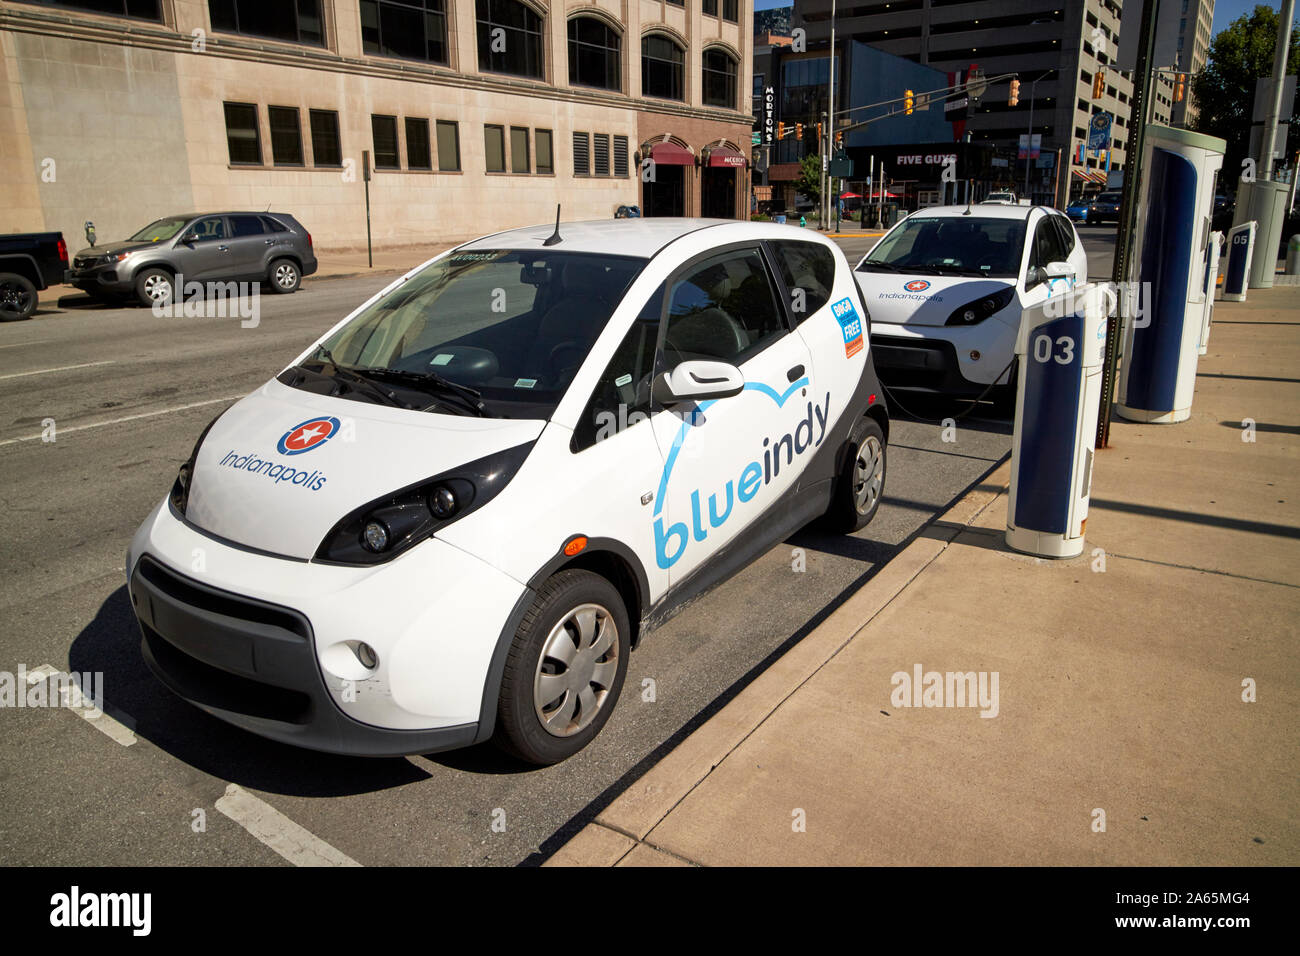 blue indy electric car rental scheme downtown indianapolis indiana USA Stock Photo